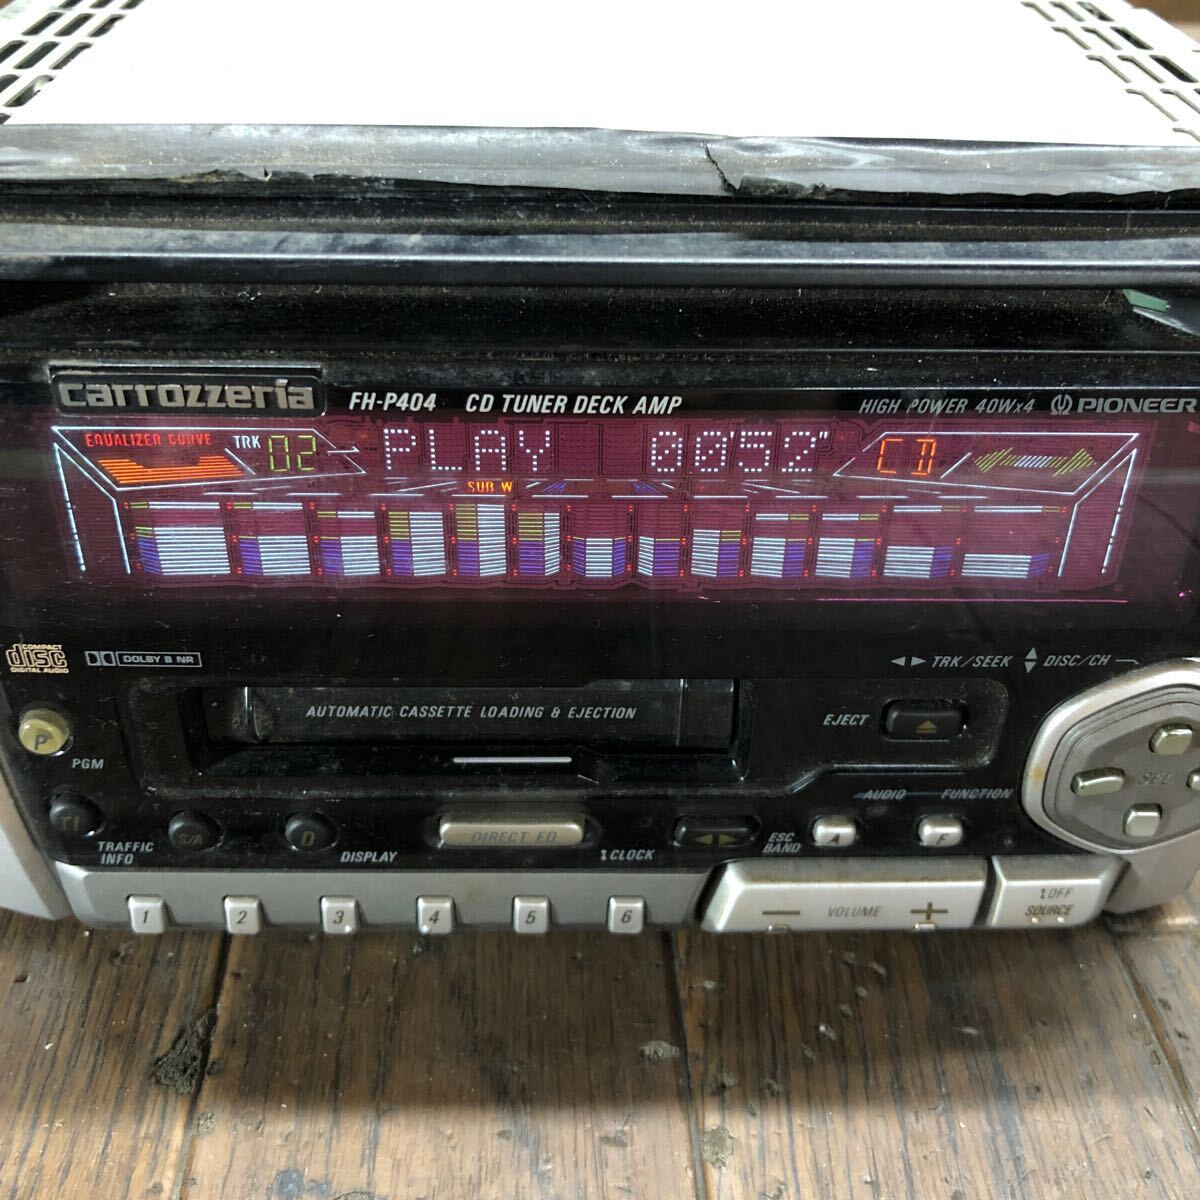 AV4-151 super-discount car stereo Carrozzeria Pioneer FH-P404 SGMD020629JP CD cassette player body only simple operation verification ending used present condition goods 